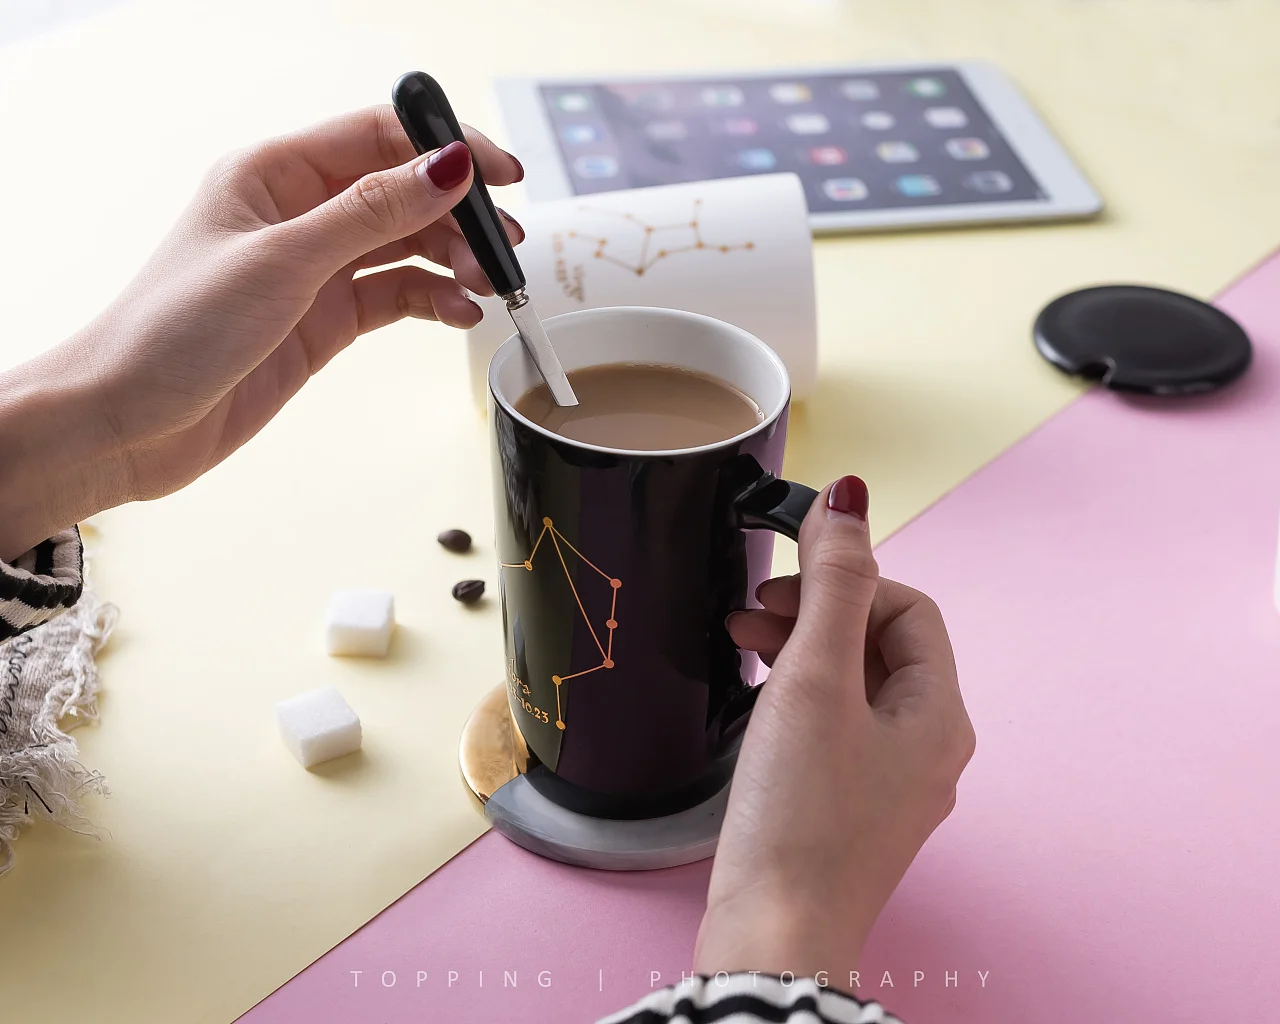 Constellations Ceramic Coffee Milk Mug with Spoon Lid Black and Porcelain Zodiac Ceramic Cup